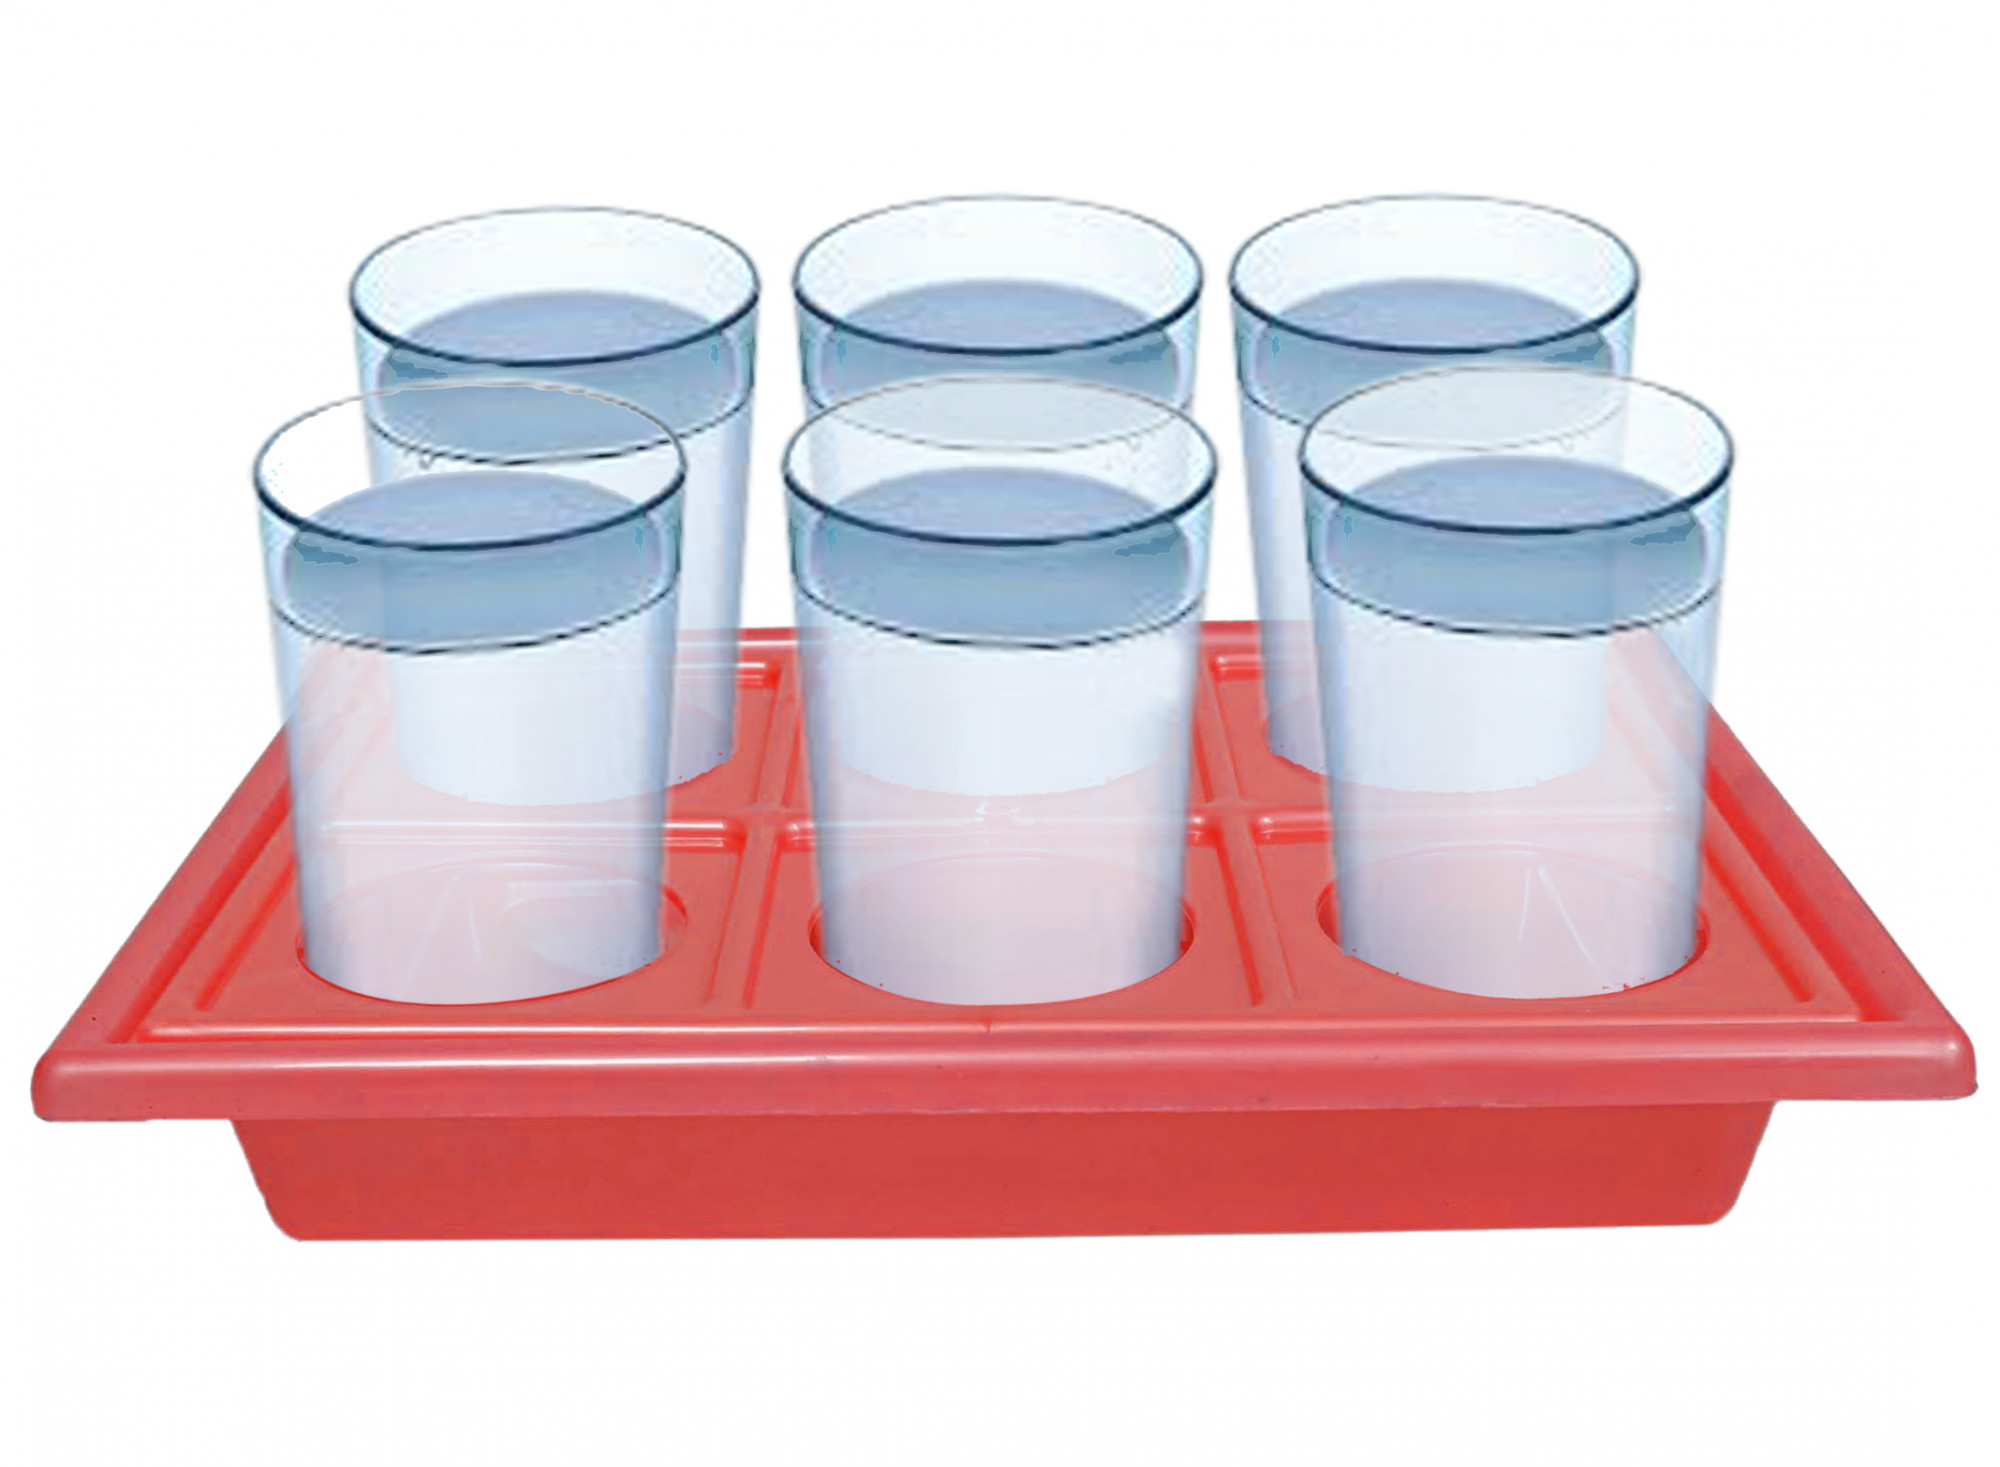 Kuber Industries Tray with Cutout Handles, Cup Display for Kitchenware, Plastic Glass Holder, One Size, 6 Slots-Pack of 2 (White & Pink)